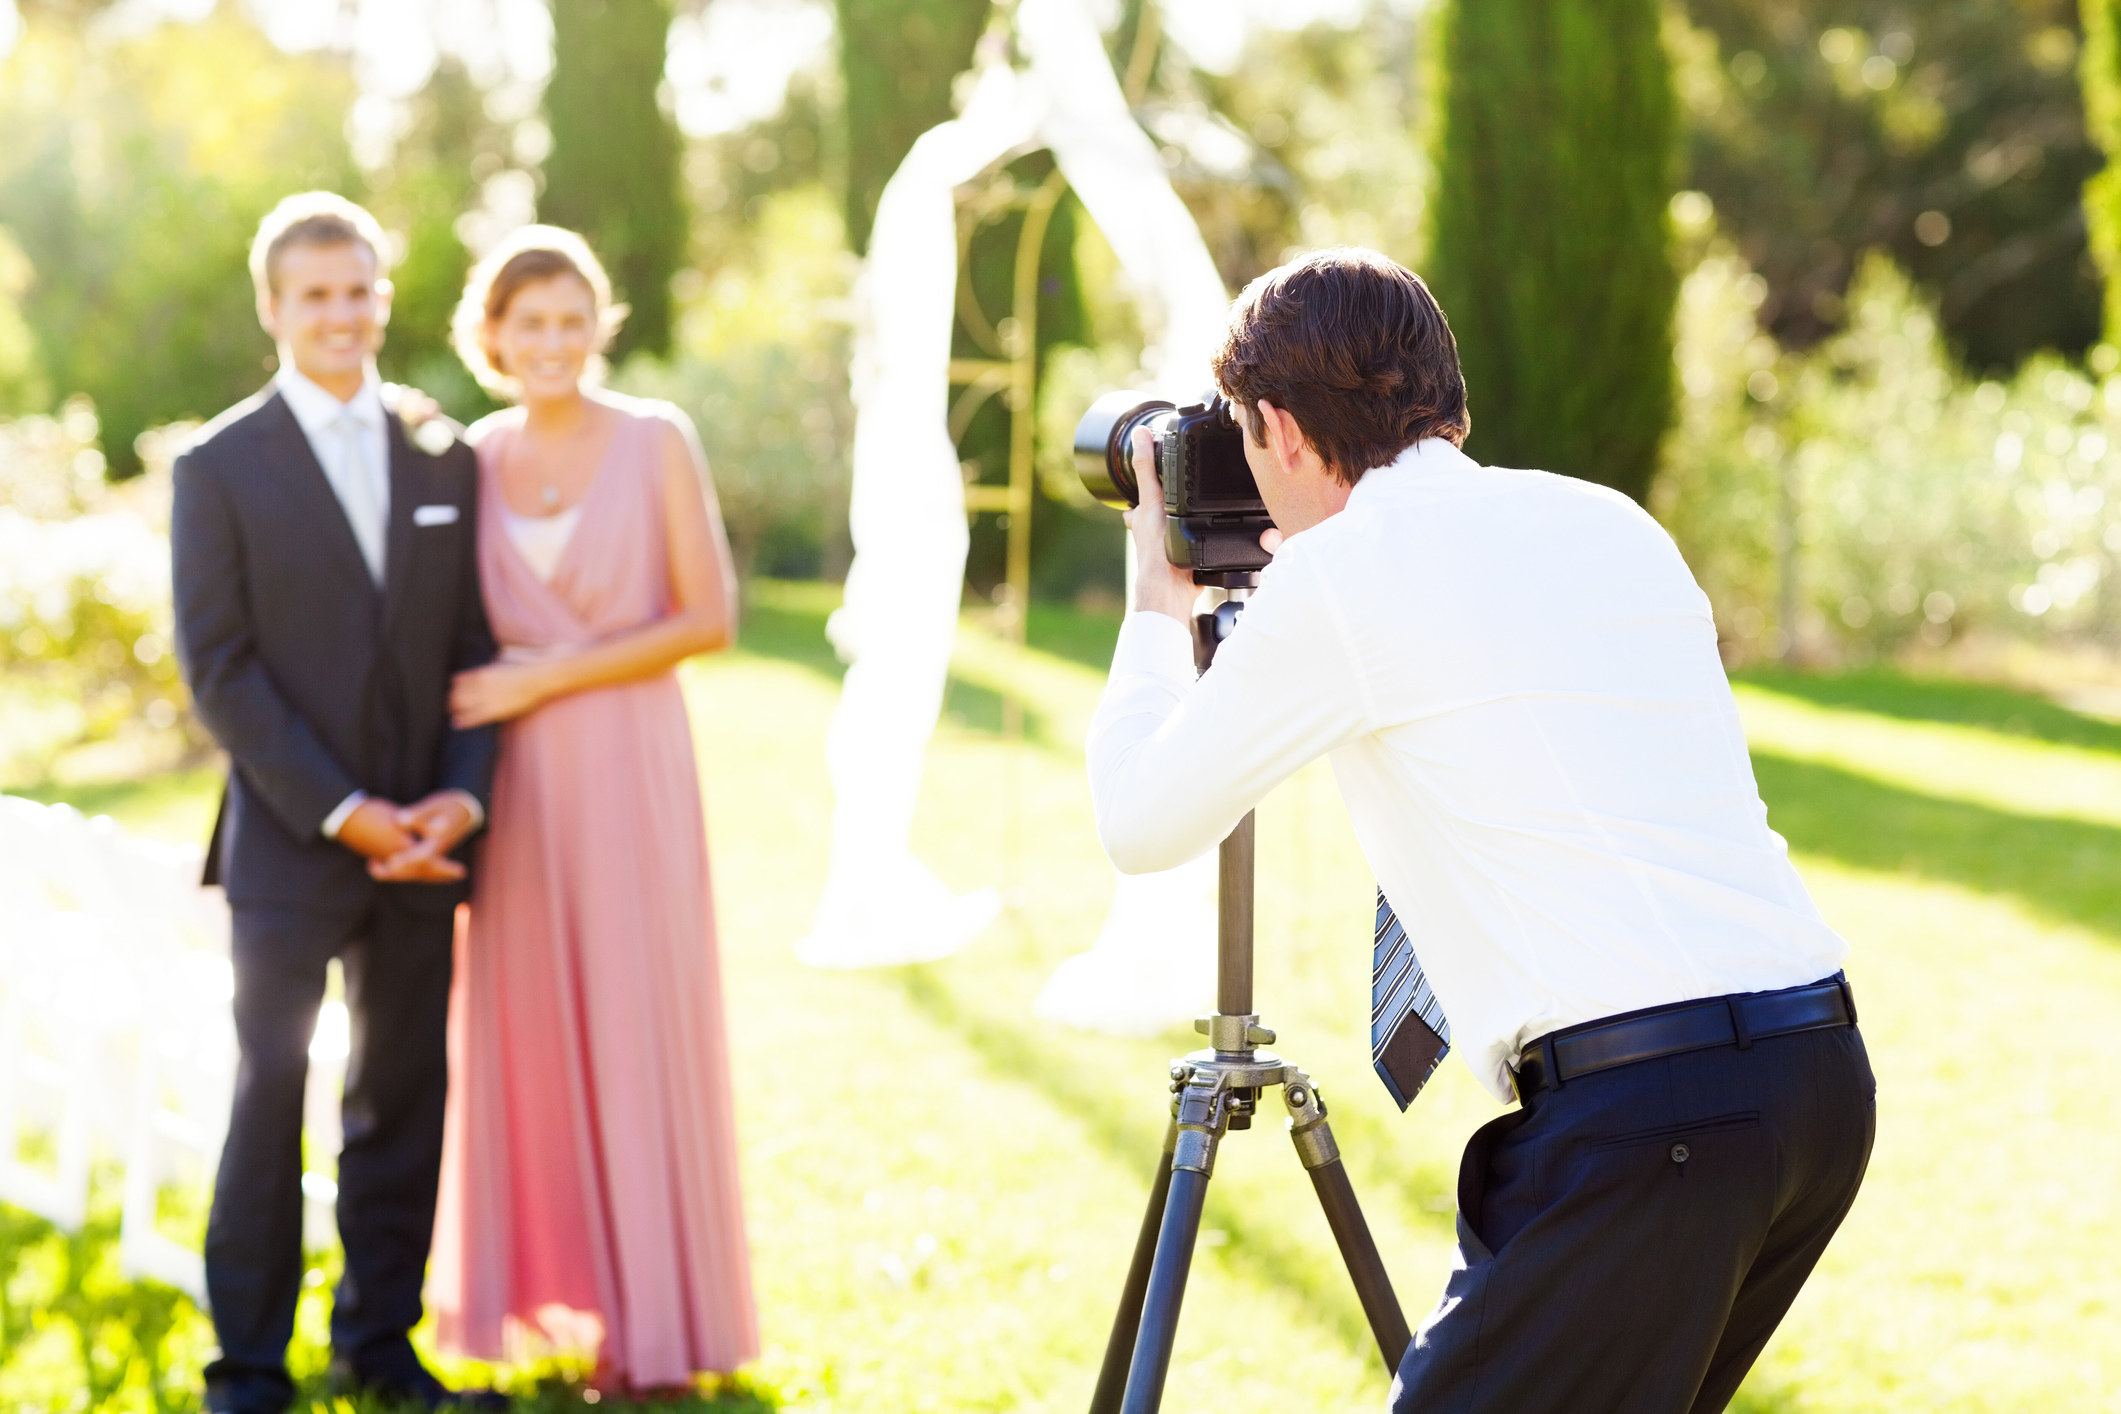 A photographer takes a picture of a couple